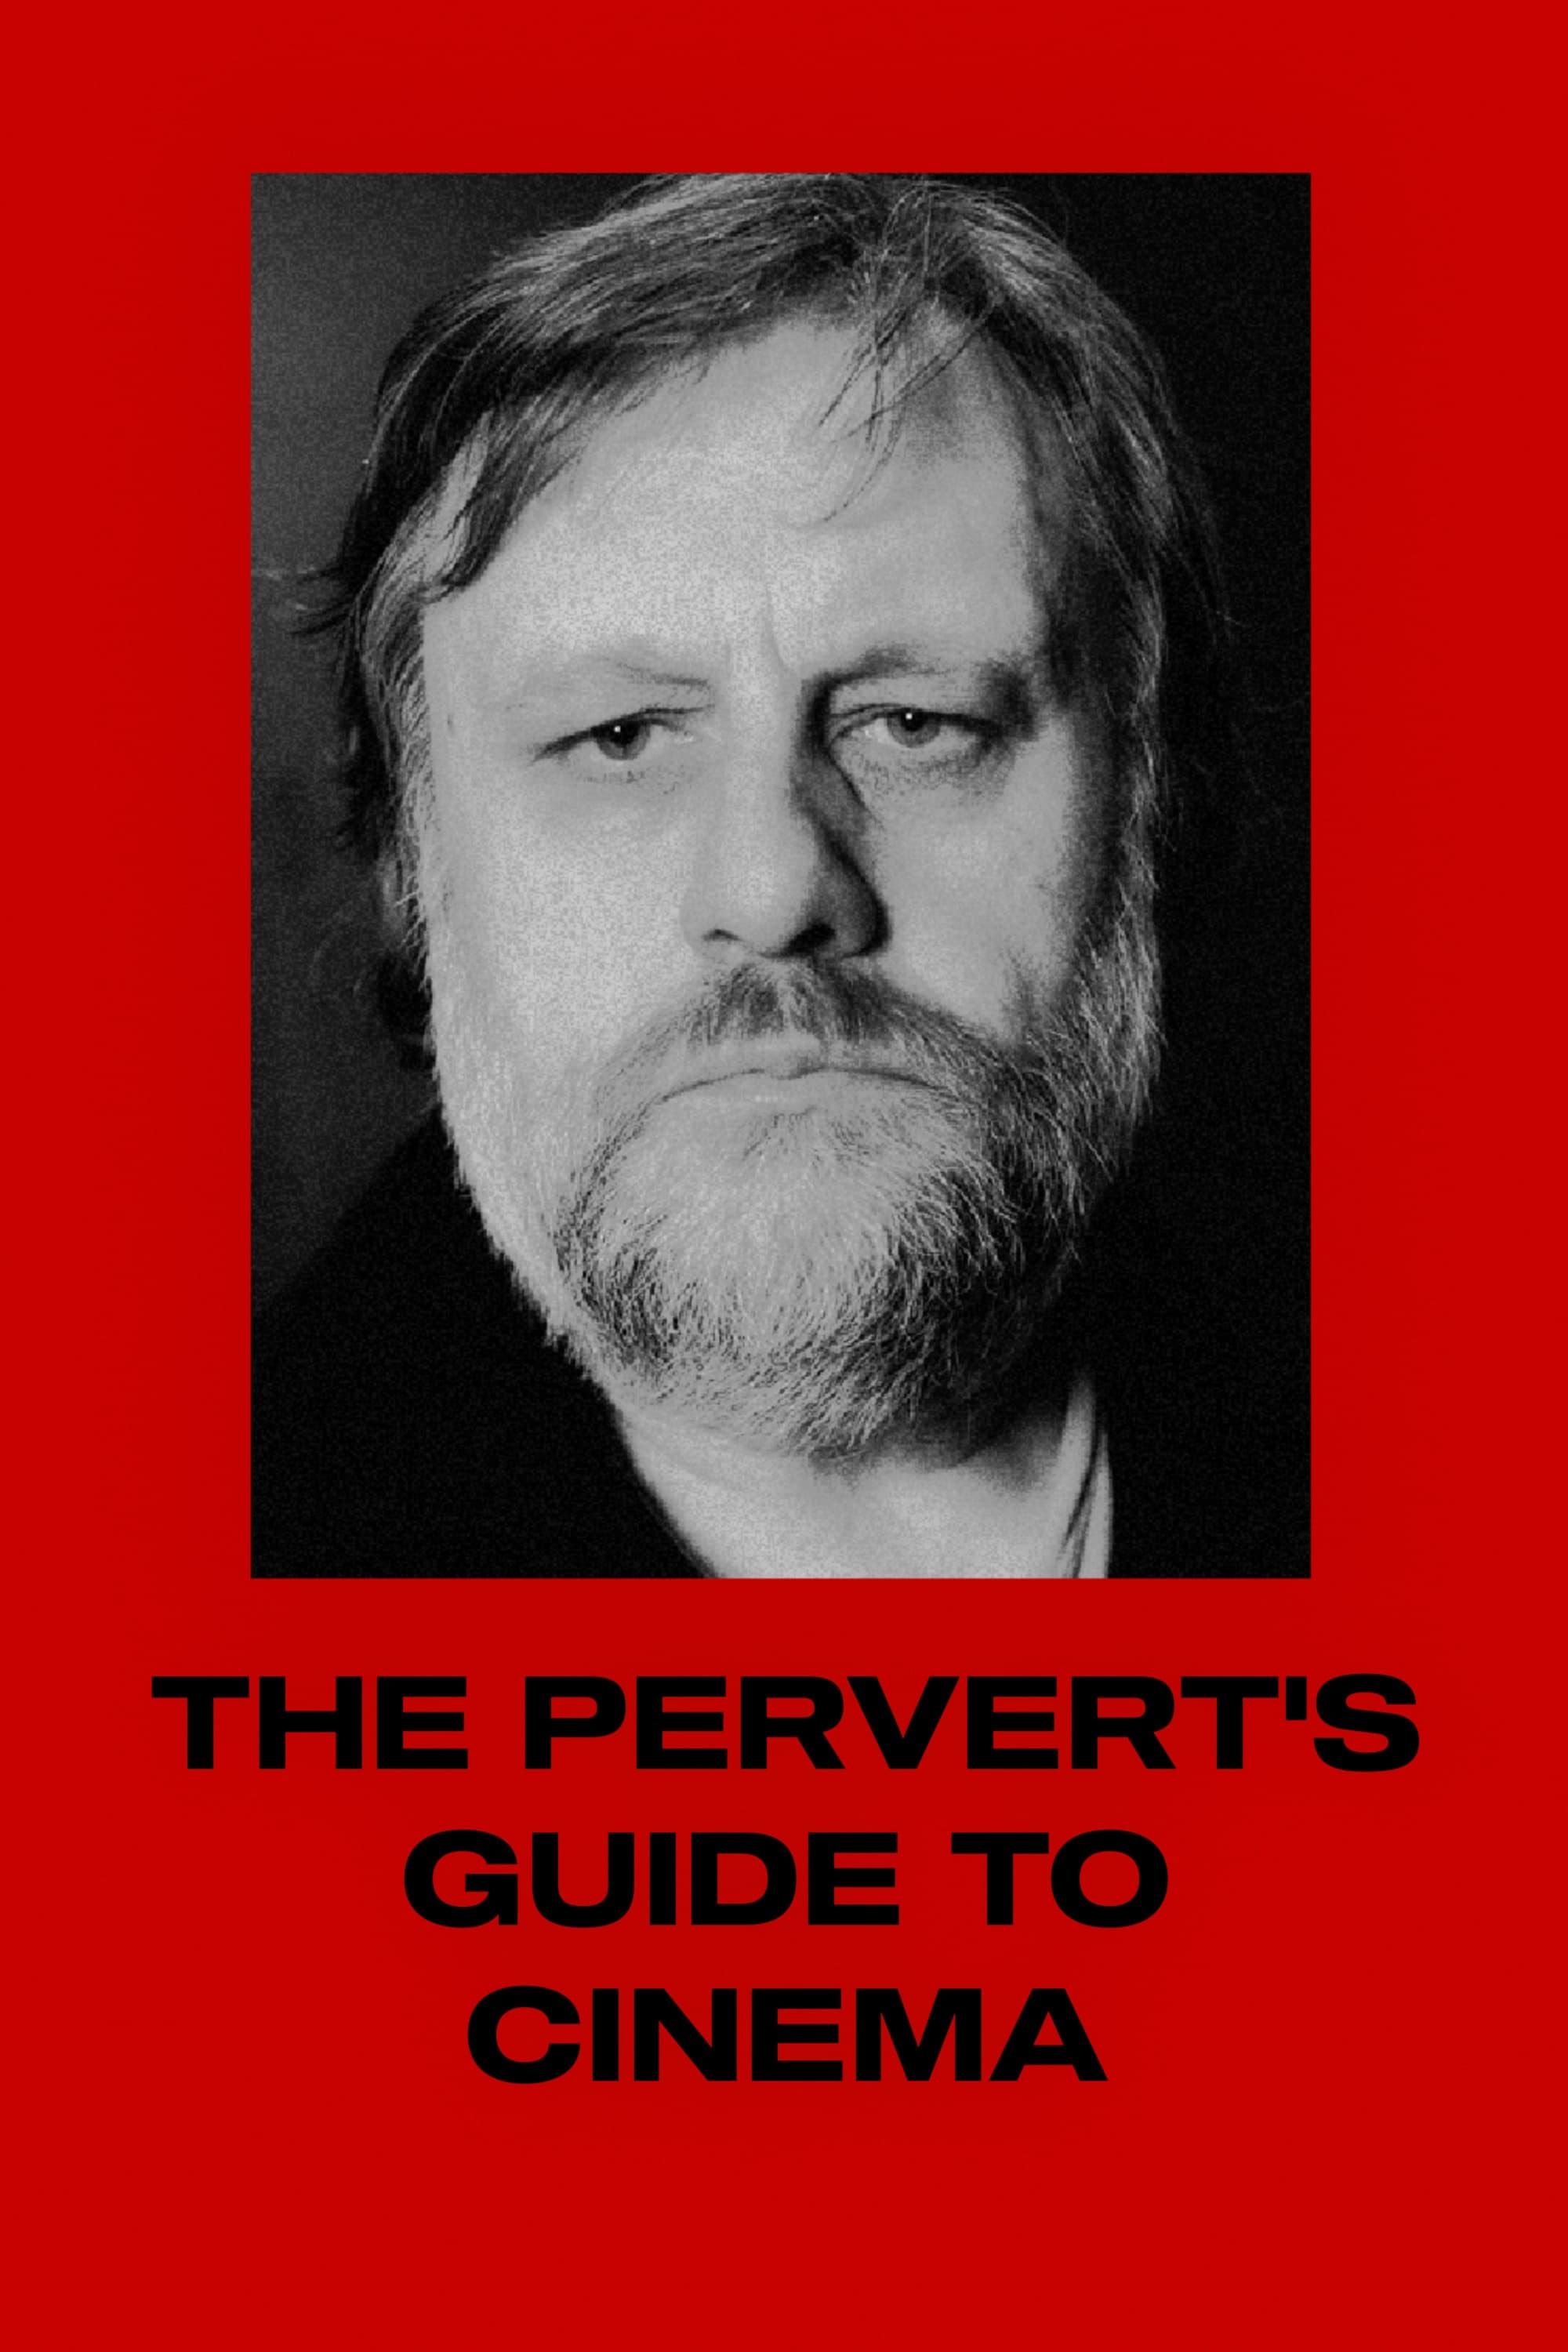 The Pervert's Guide to Cinema poster